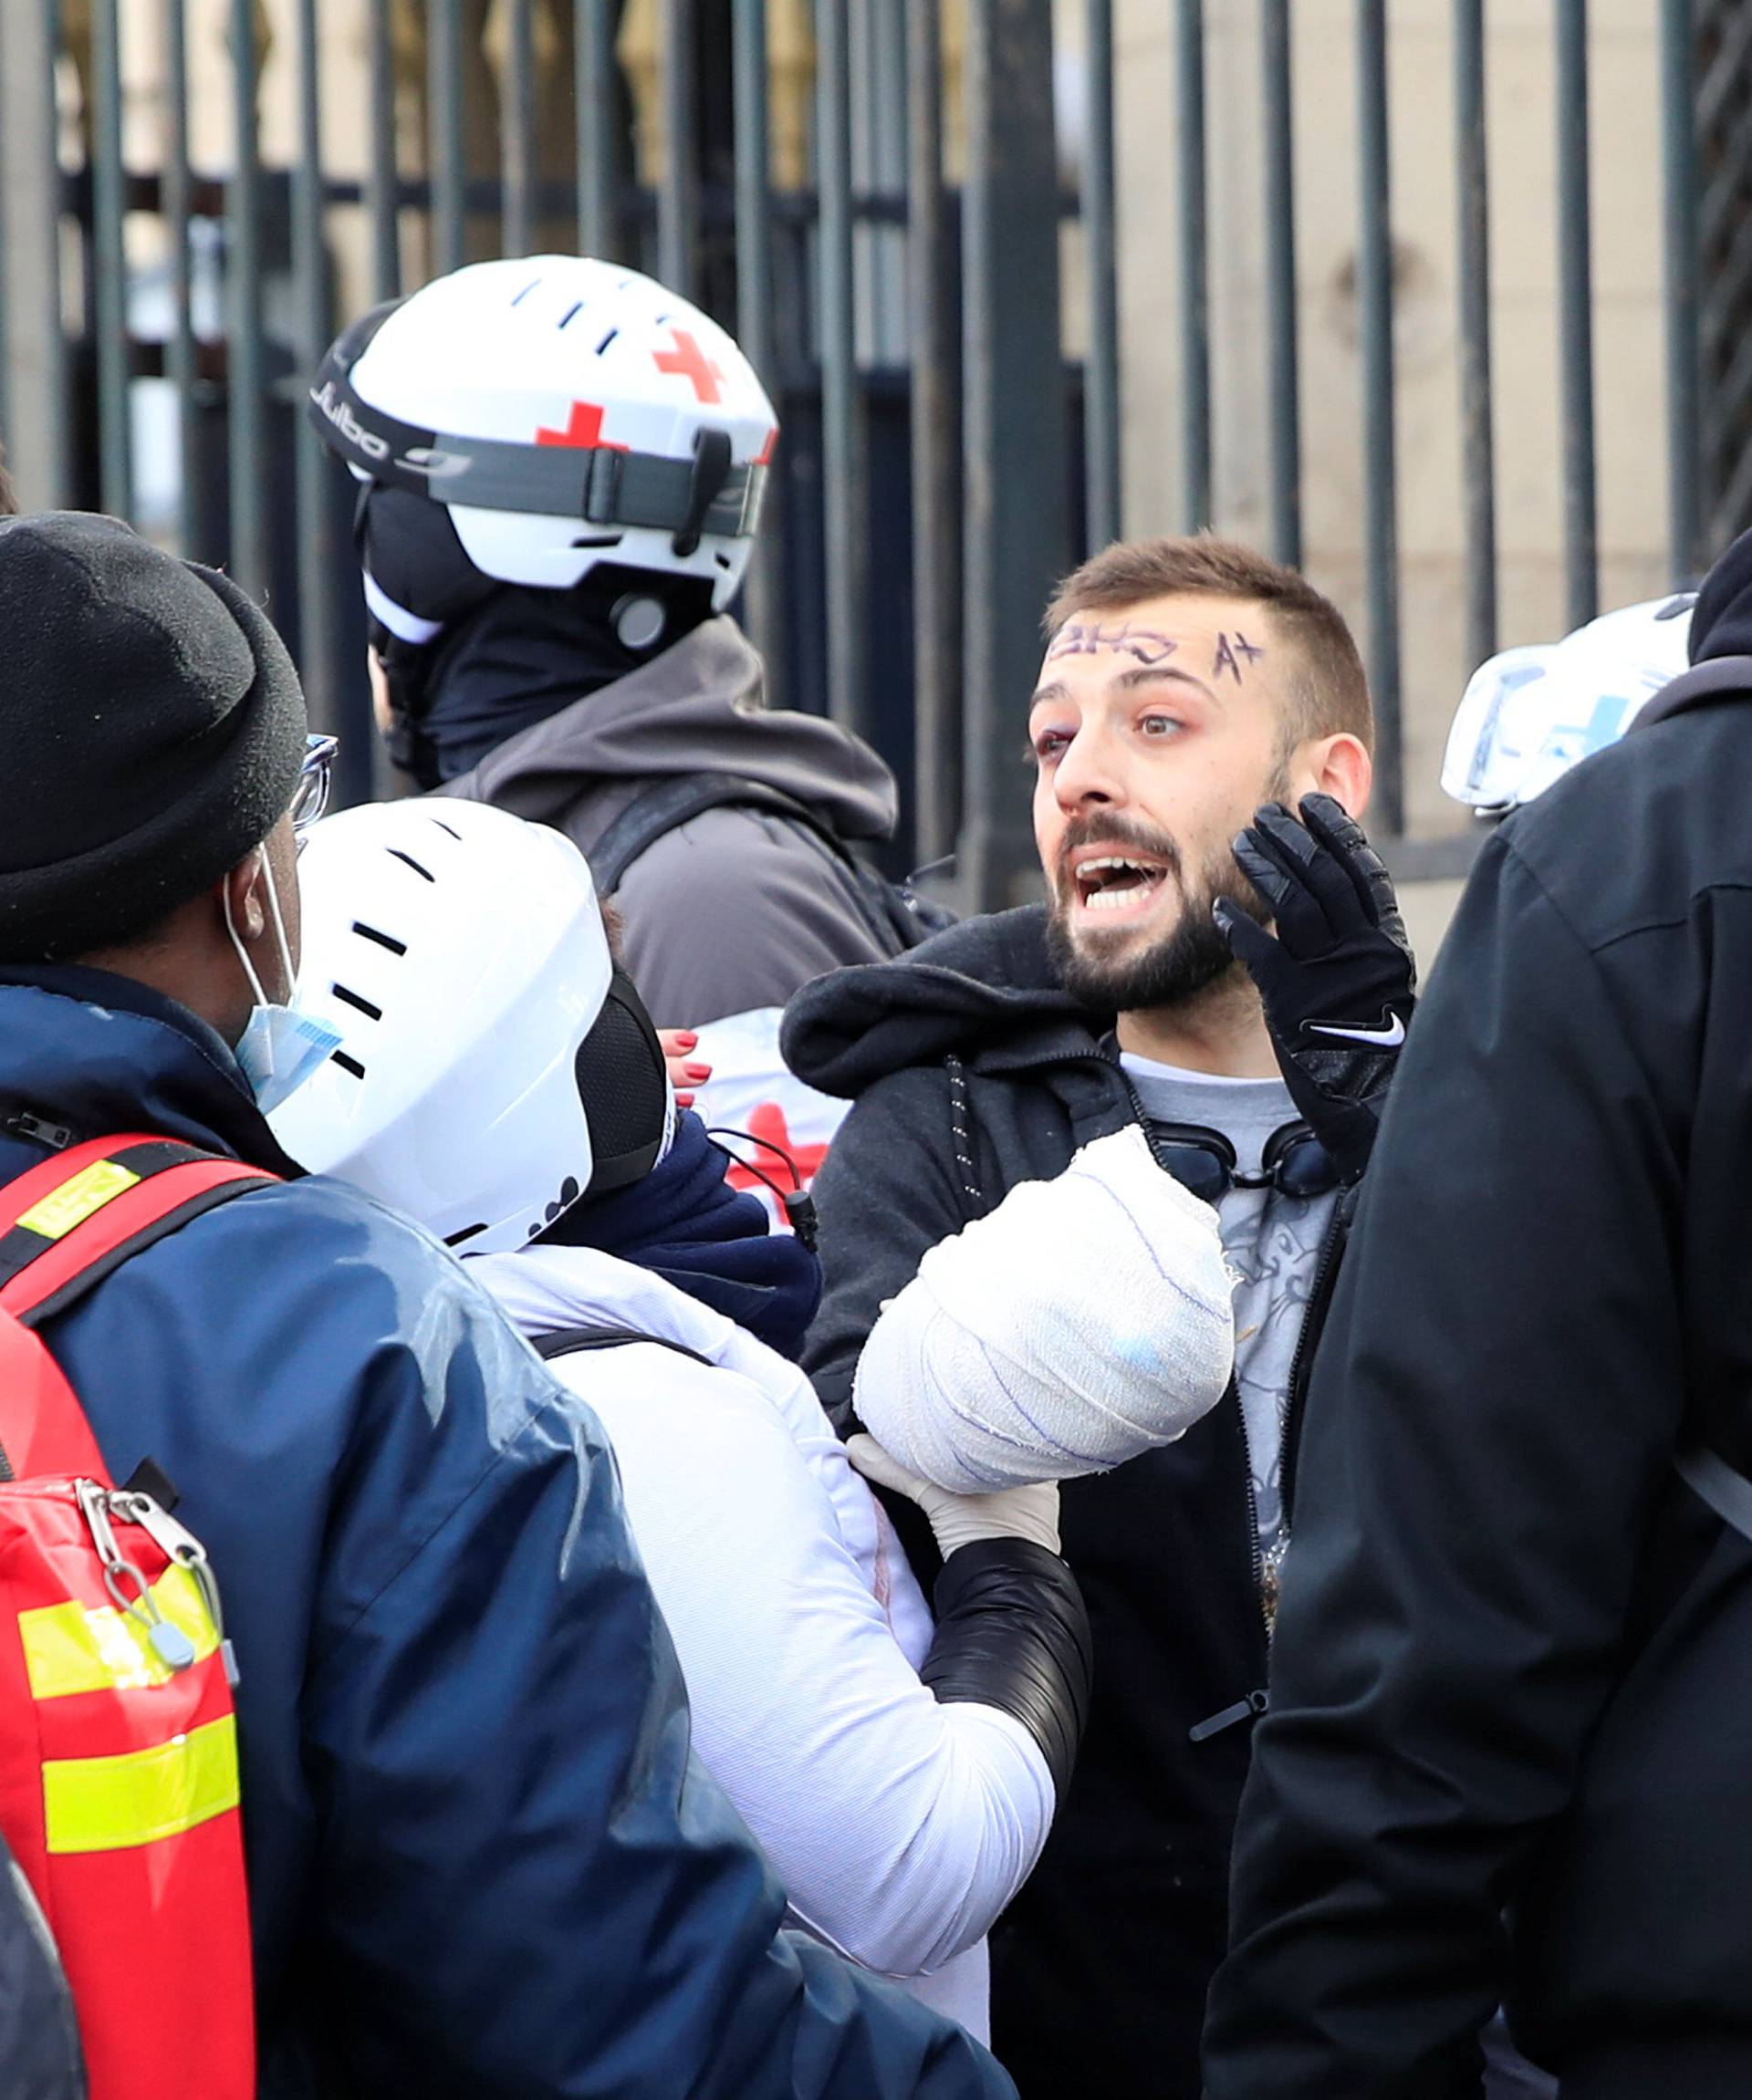 An injured protester is given help during a demonstration by the "yellow vests" movement in Paris